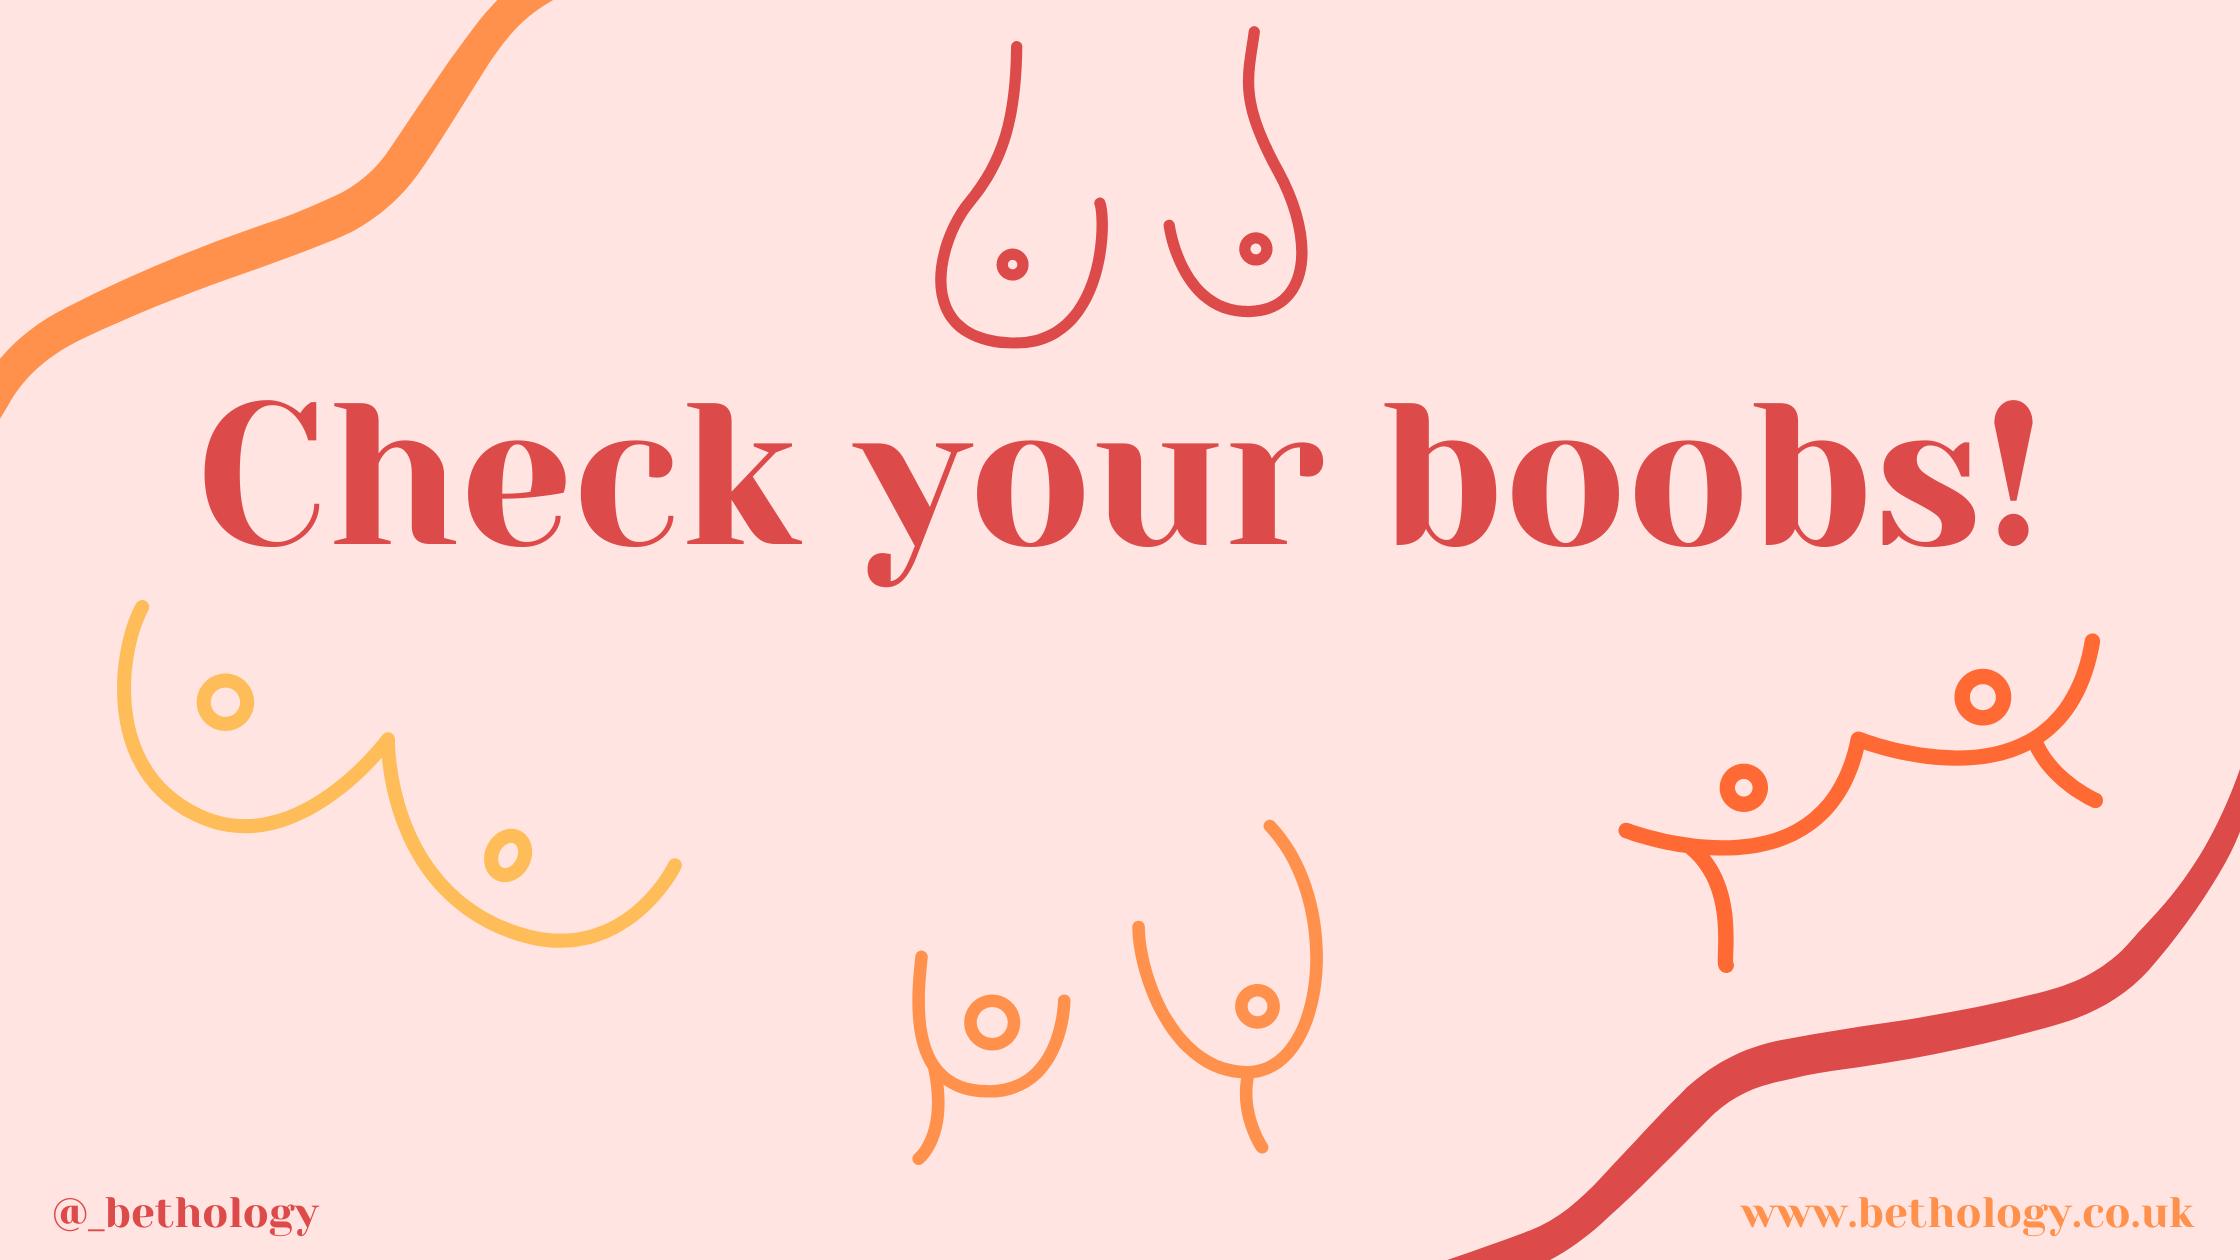 https://biologybethscience.files.wordpress.com/2020/10/check-your-boobs-banner.png